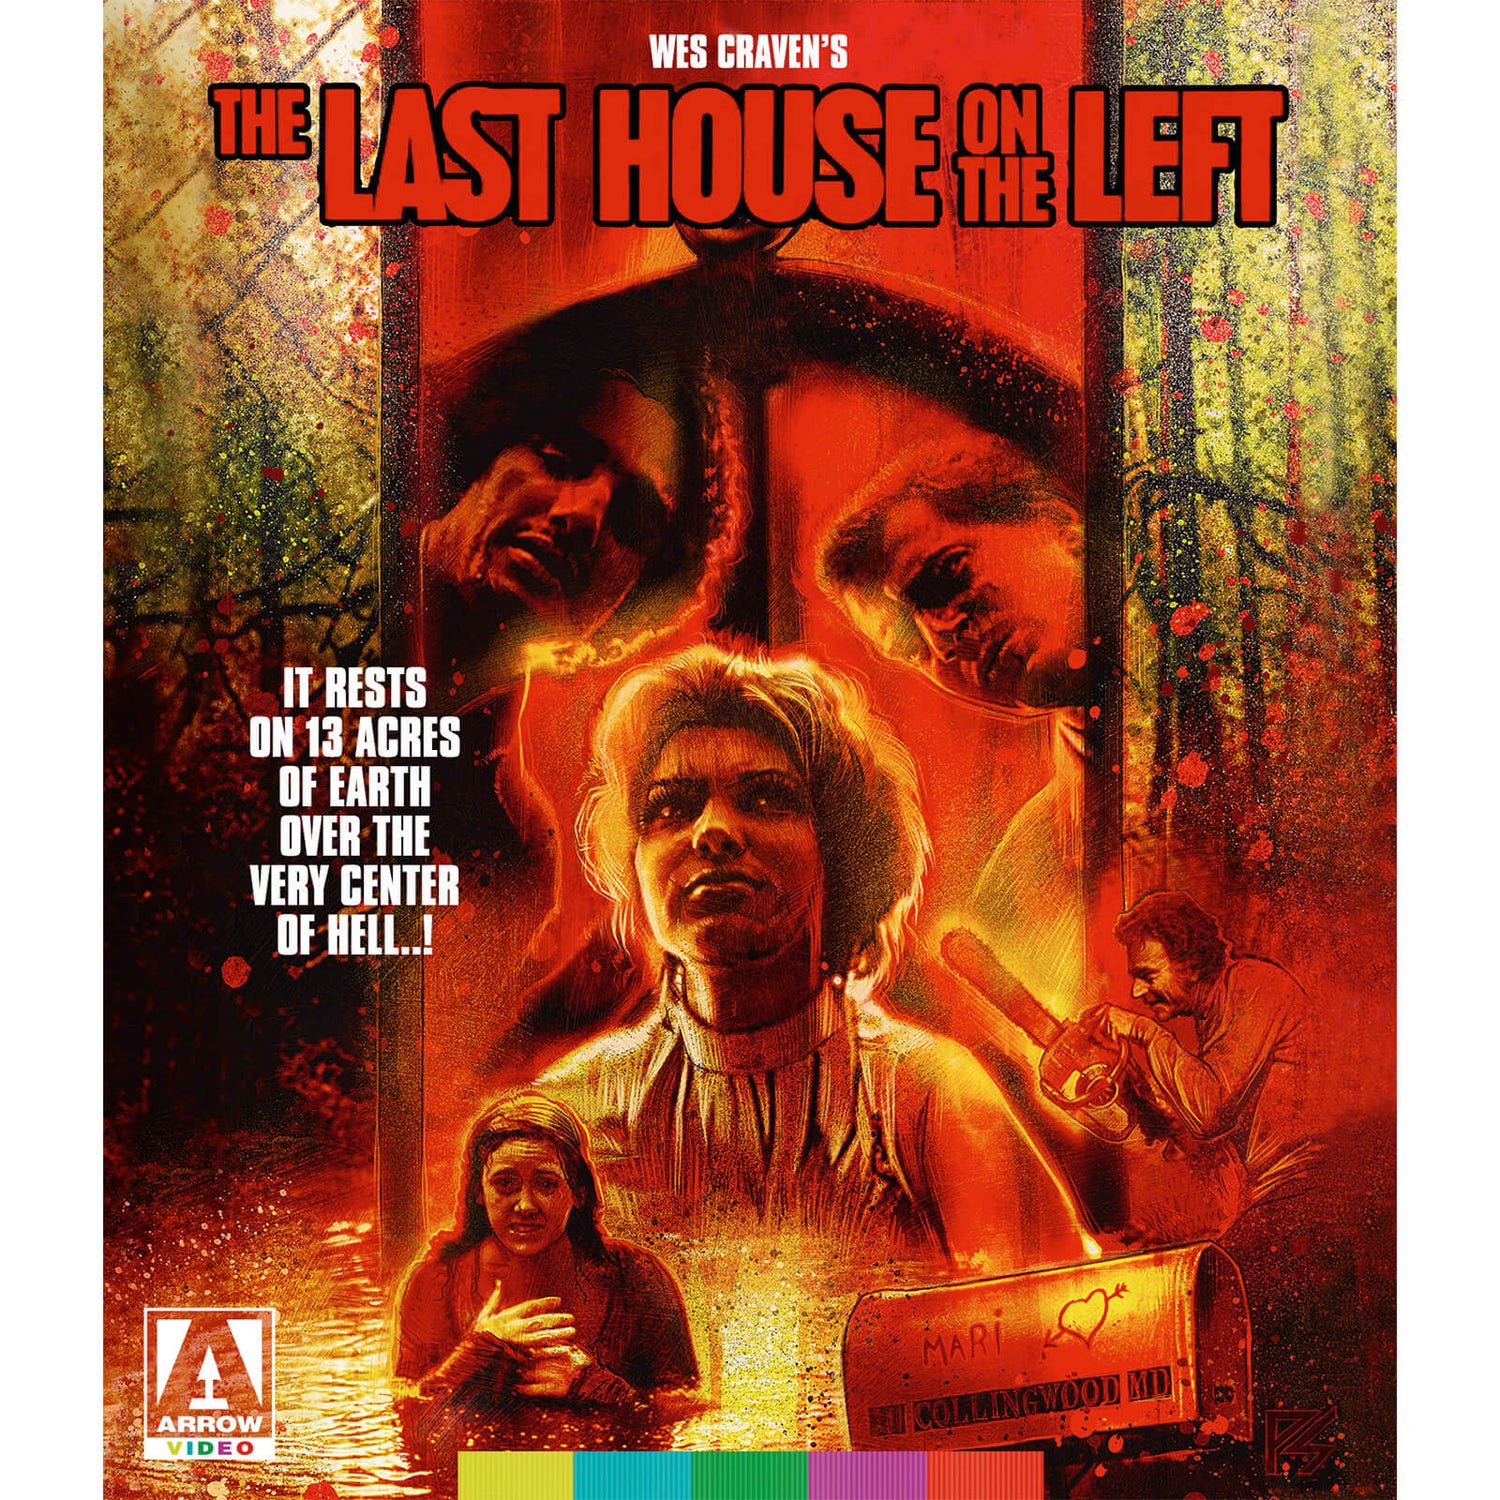 The Last House On The Left Blu-ray